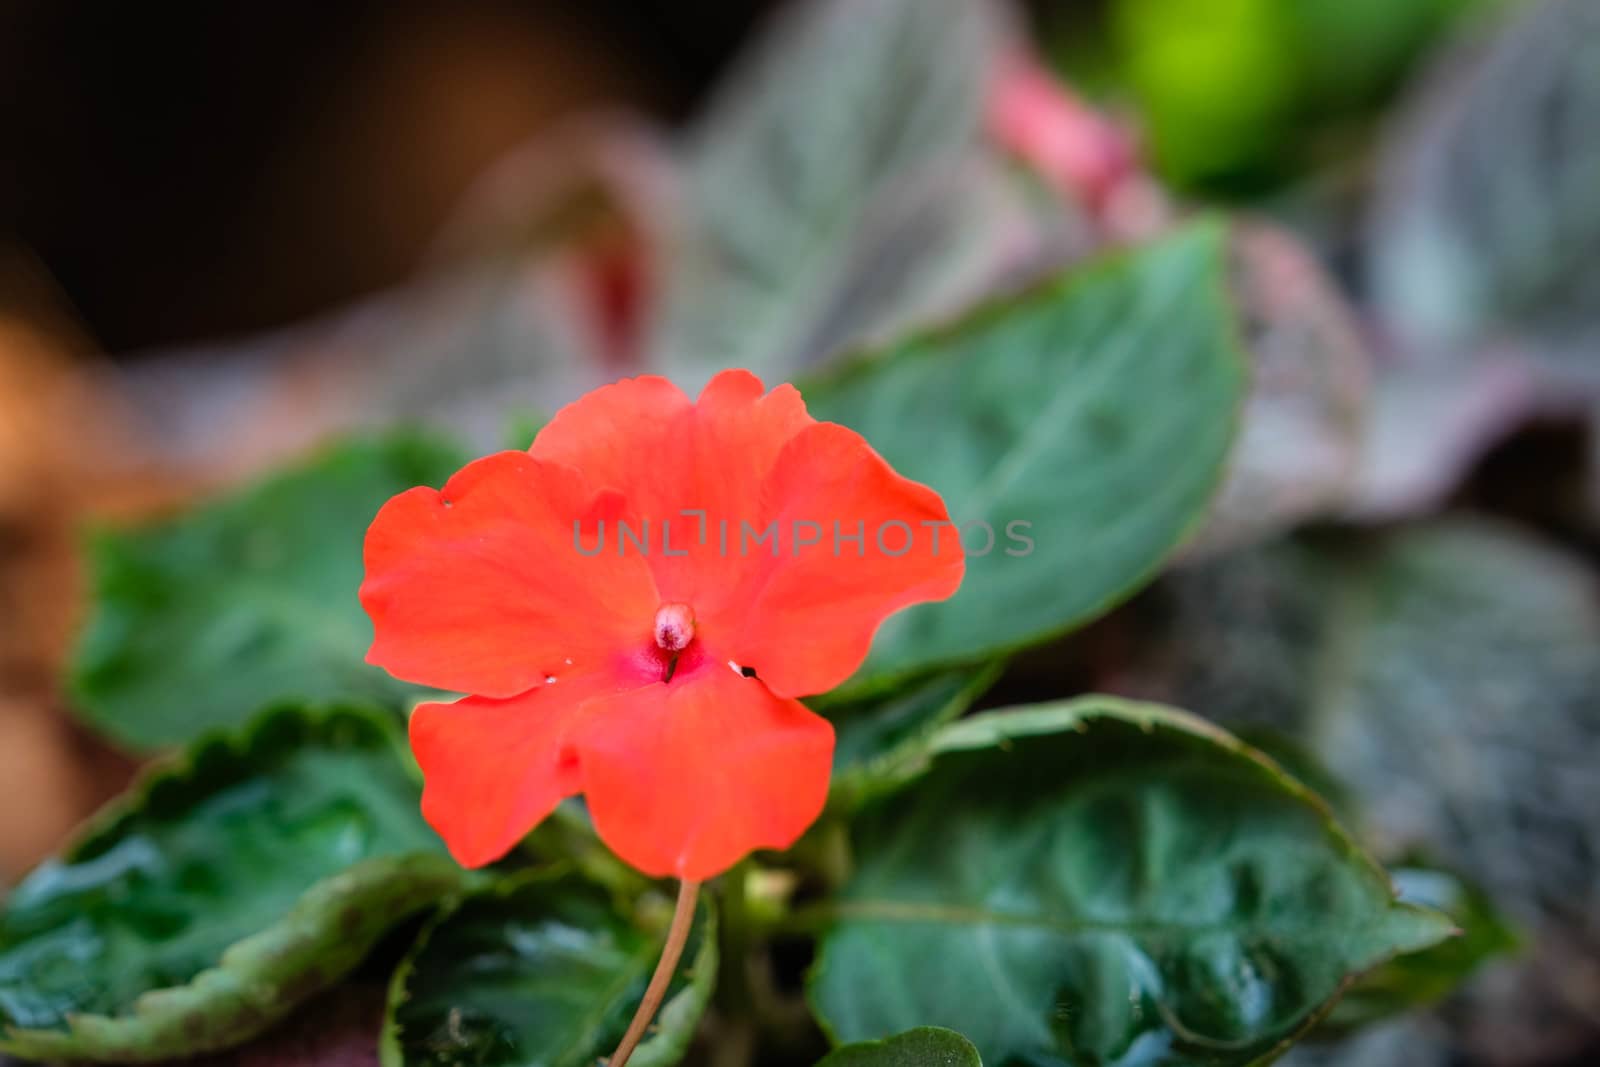 A Red flowers. Blurred background in garden. Close-up